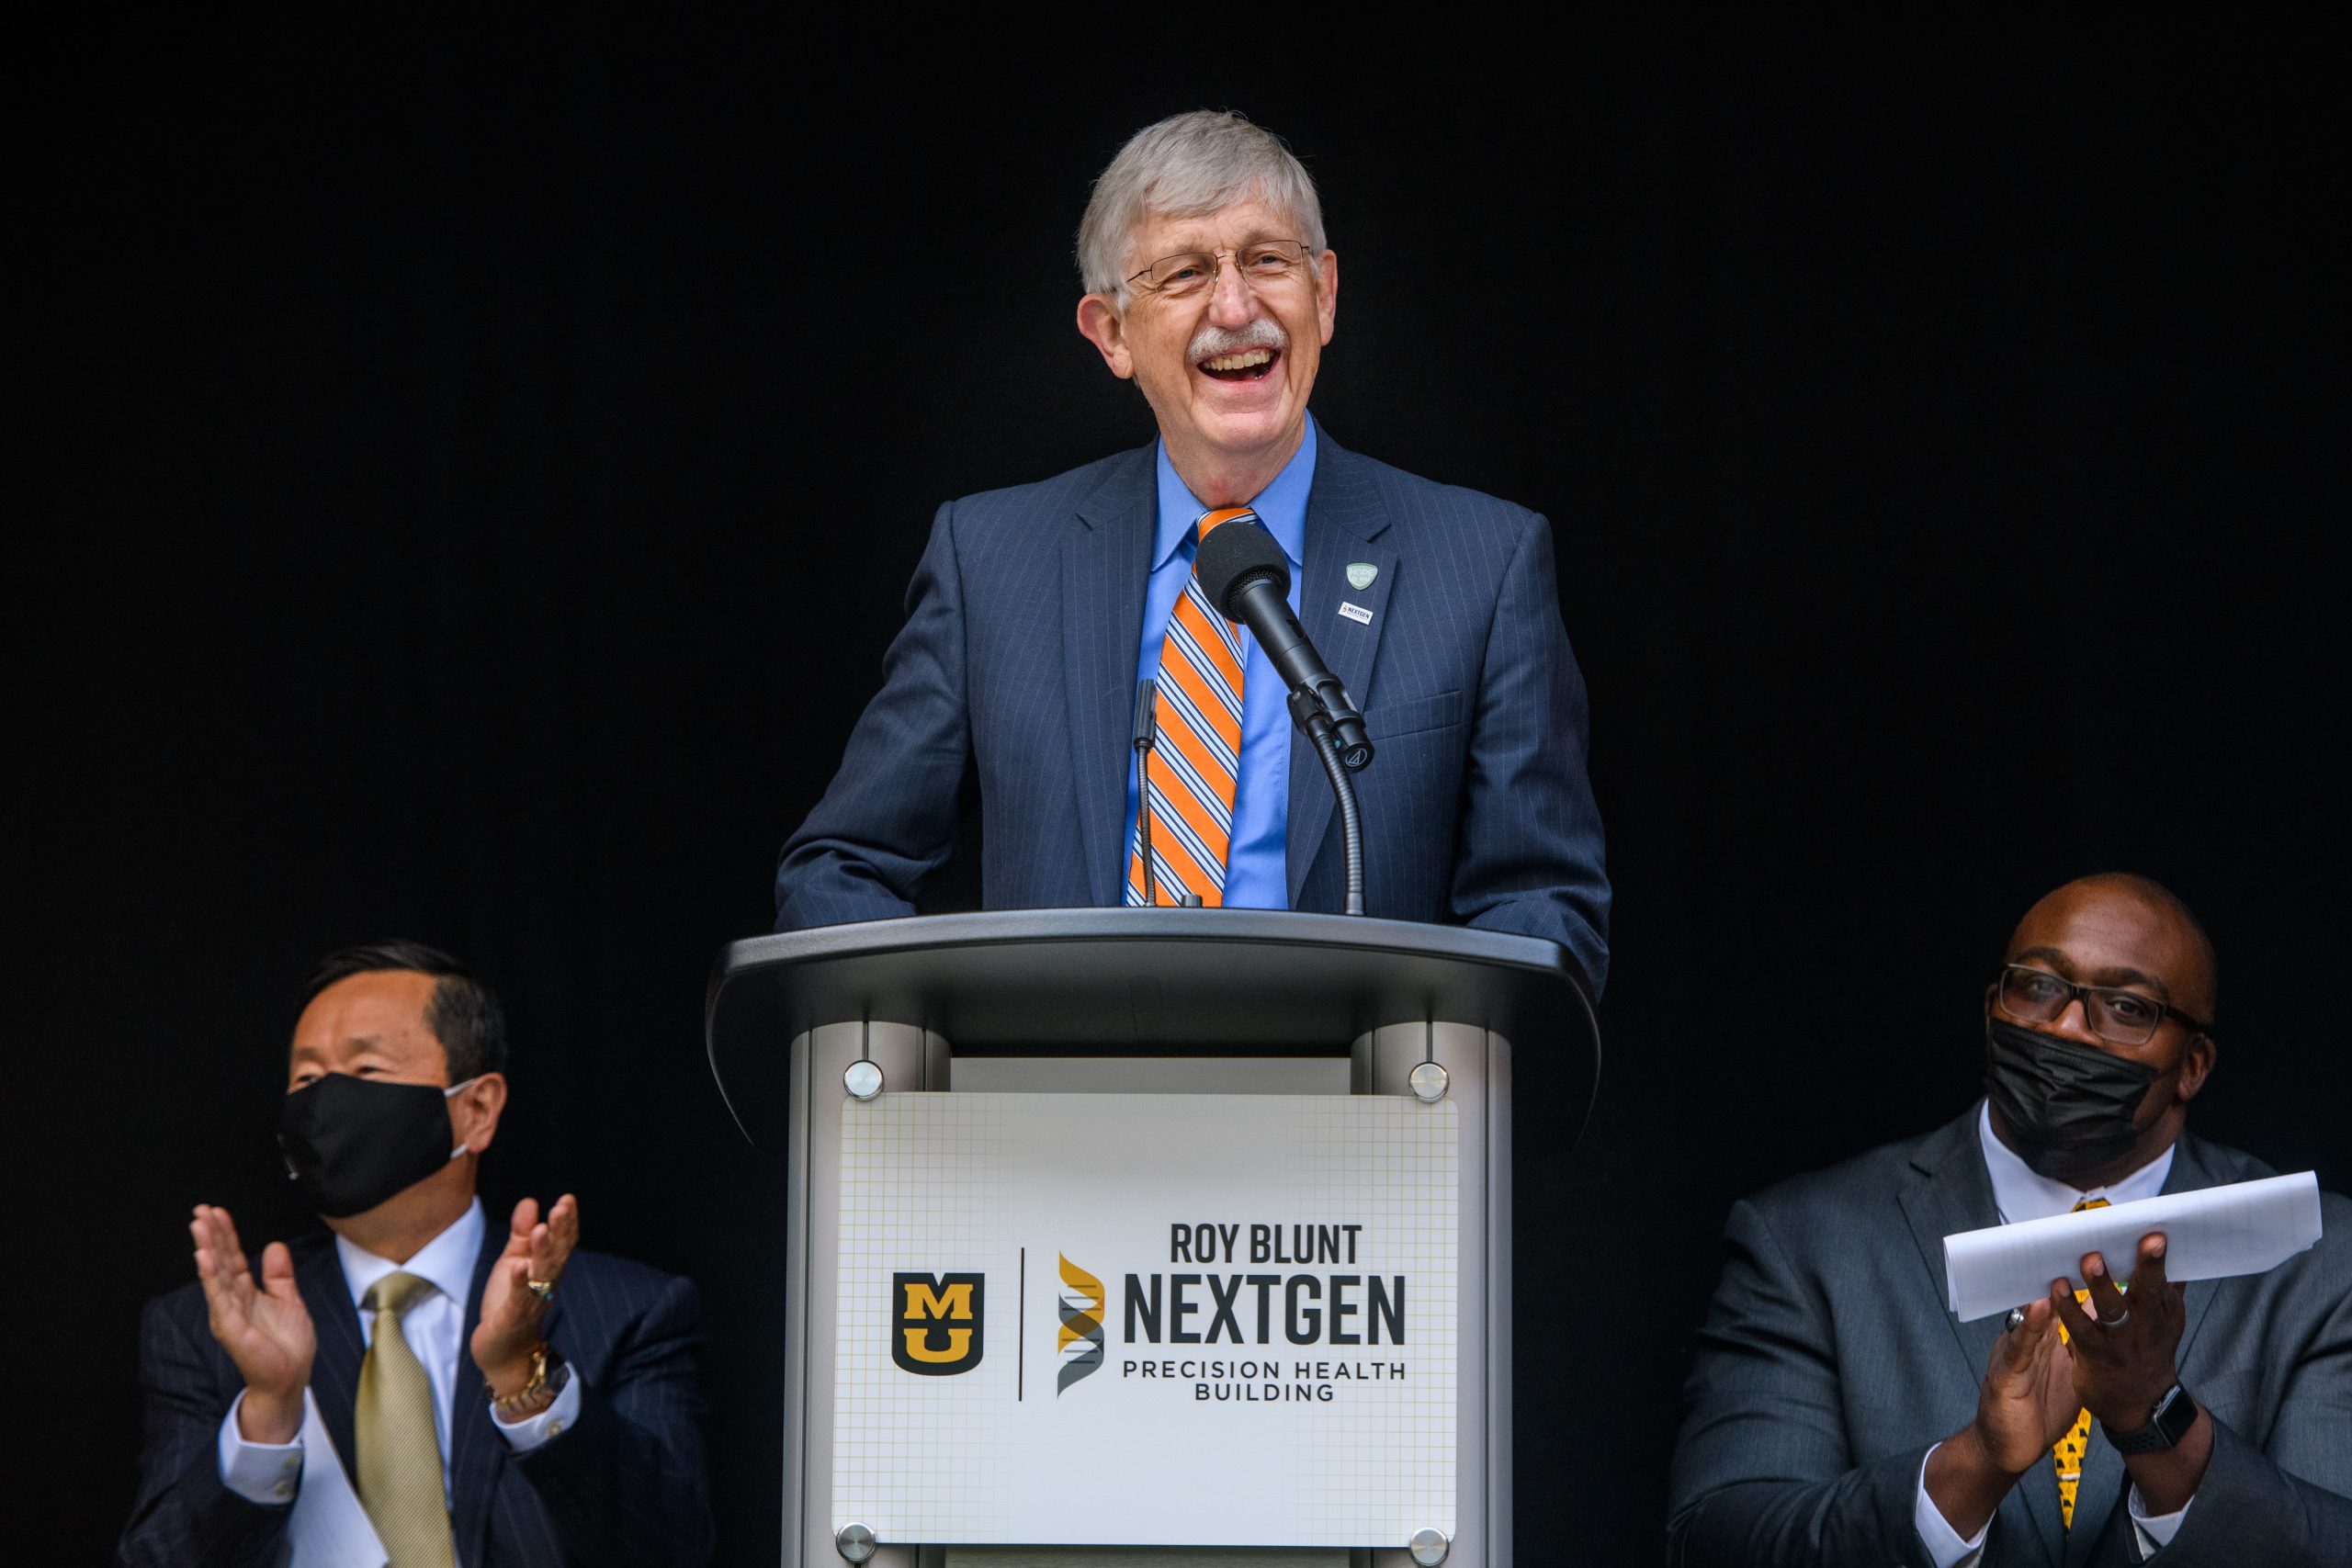 Francis Collins, Director, National Institutes of Health makes remarks during the Roy Blunt NextGen building Grand Opening Program on Tuesday, Oct. 19, 2021 in Columbia, Mo.